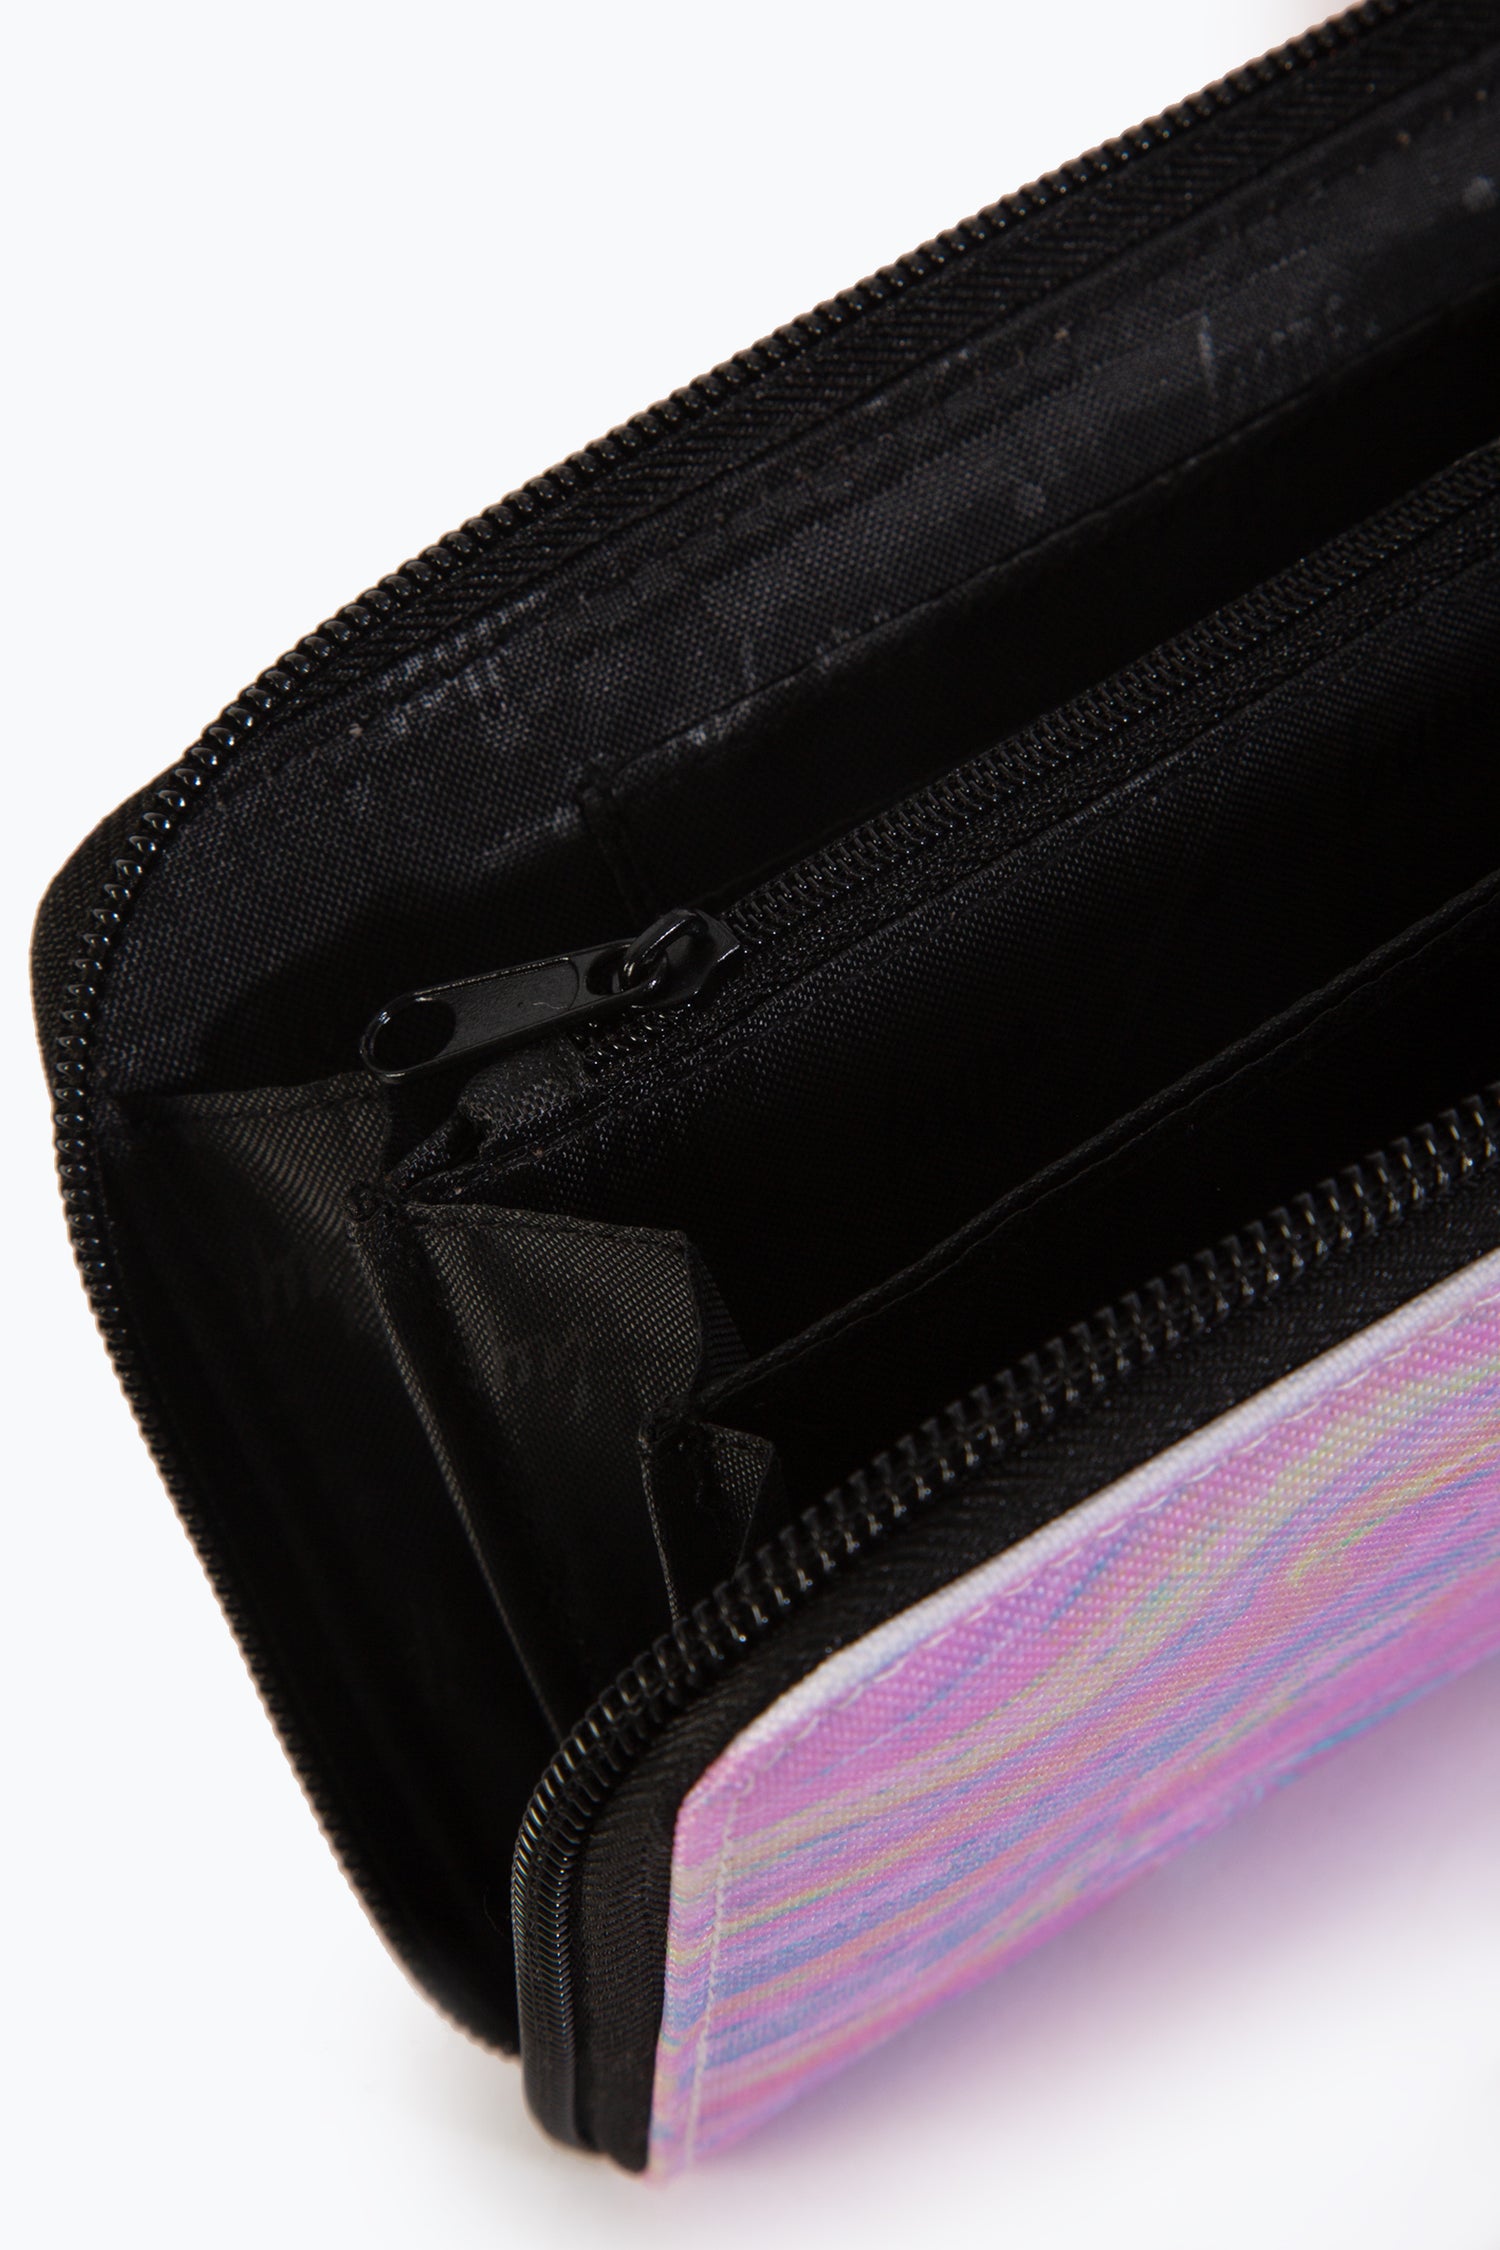 HYPE UNISEX MULTI HOLOGRAPHIC STATIC WALLET